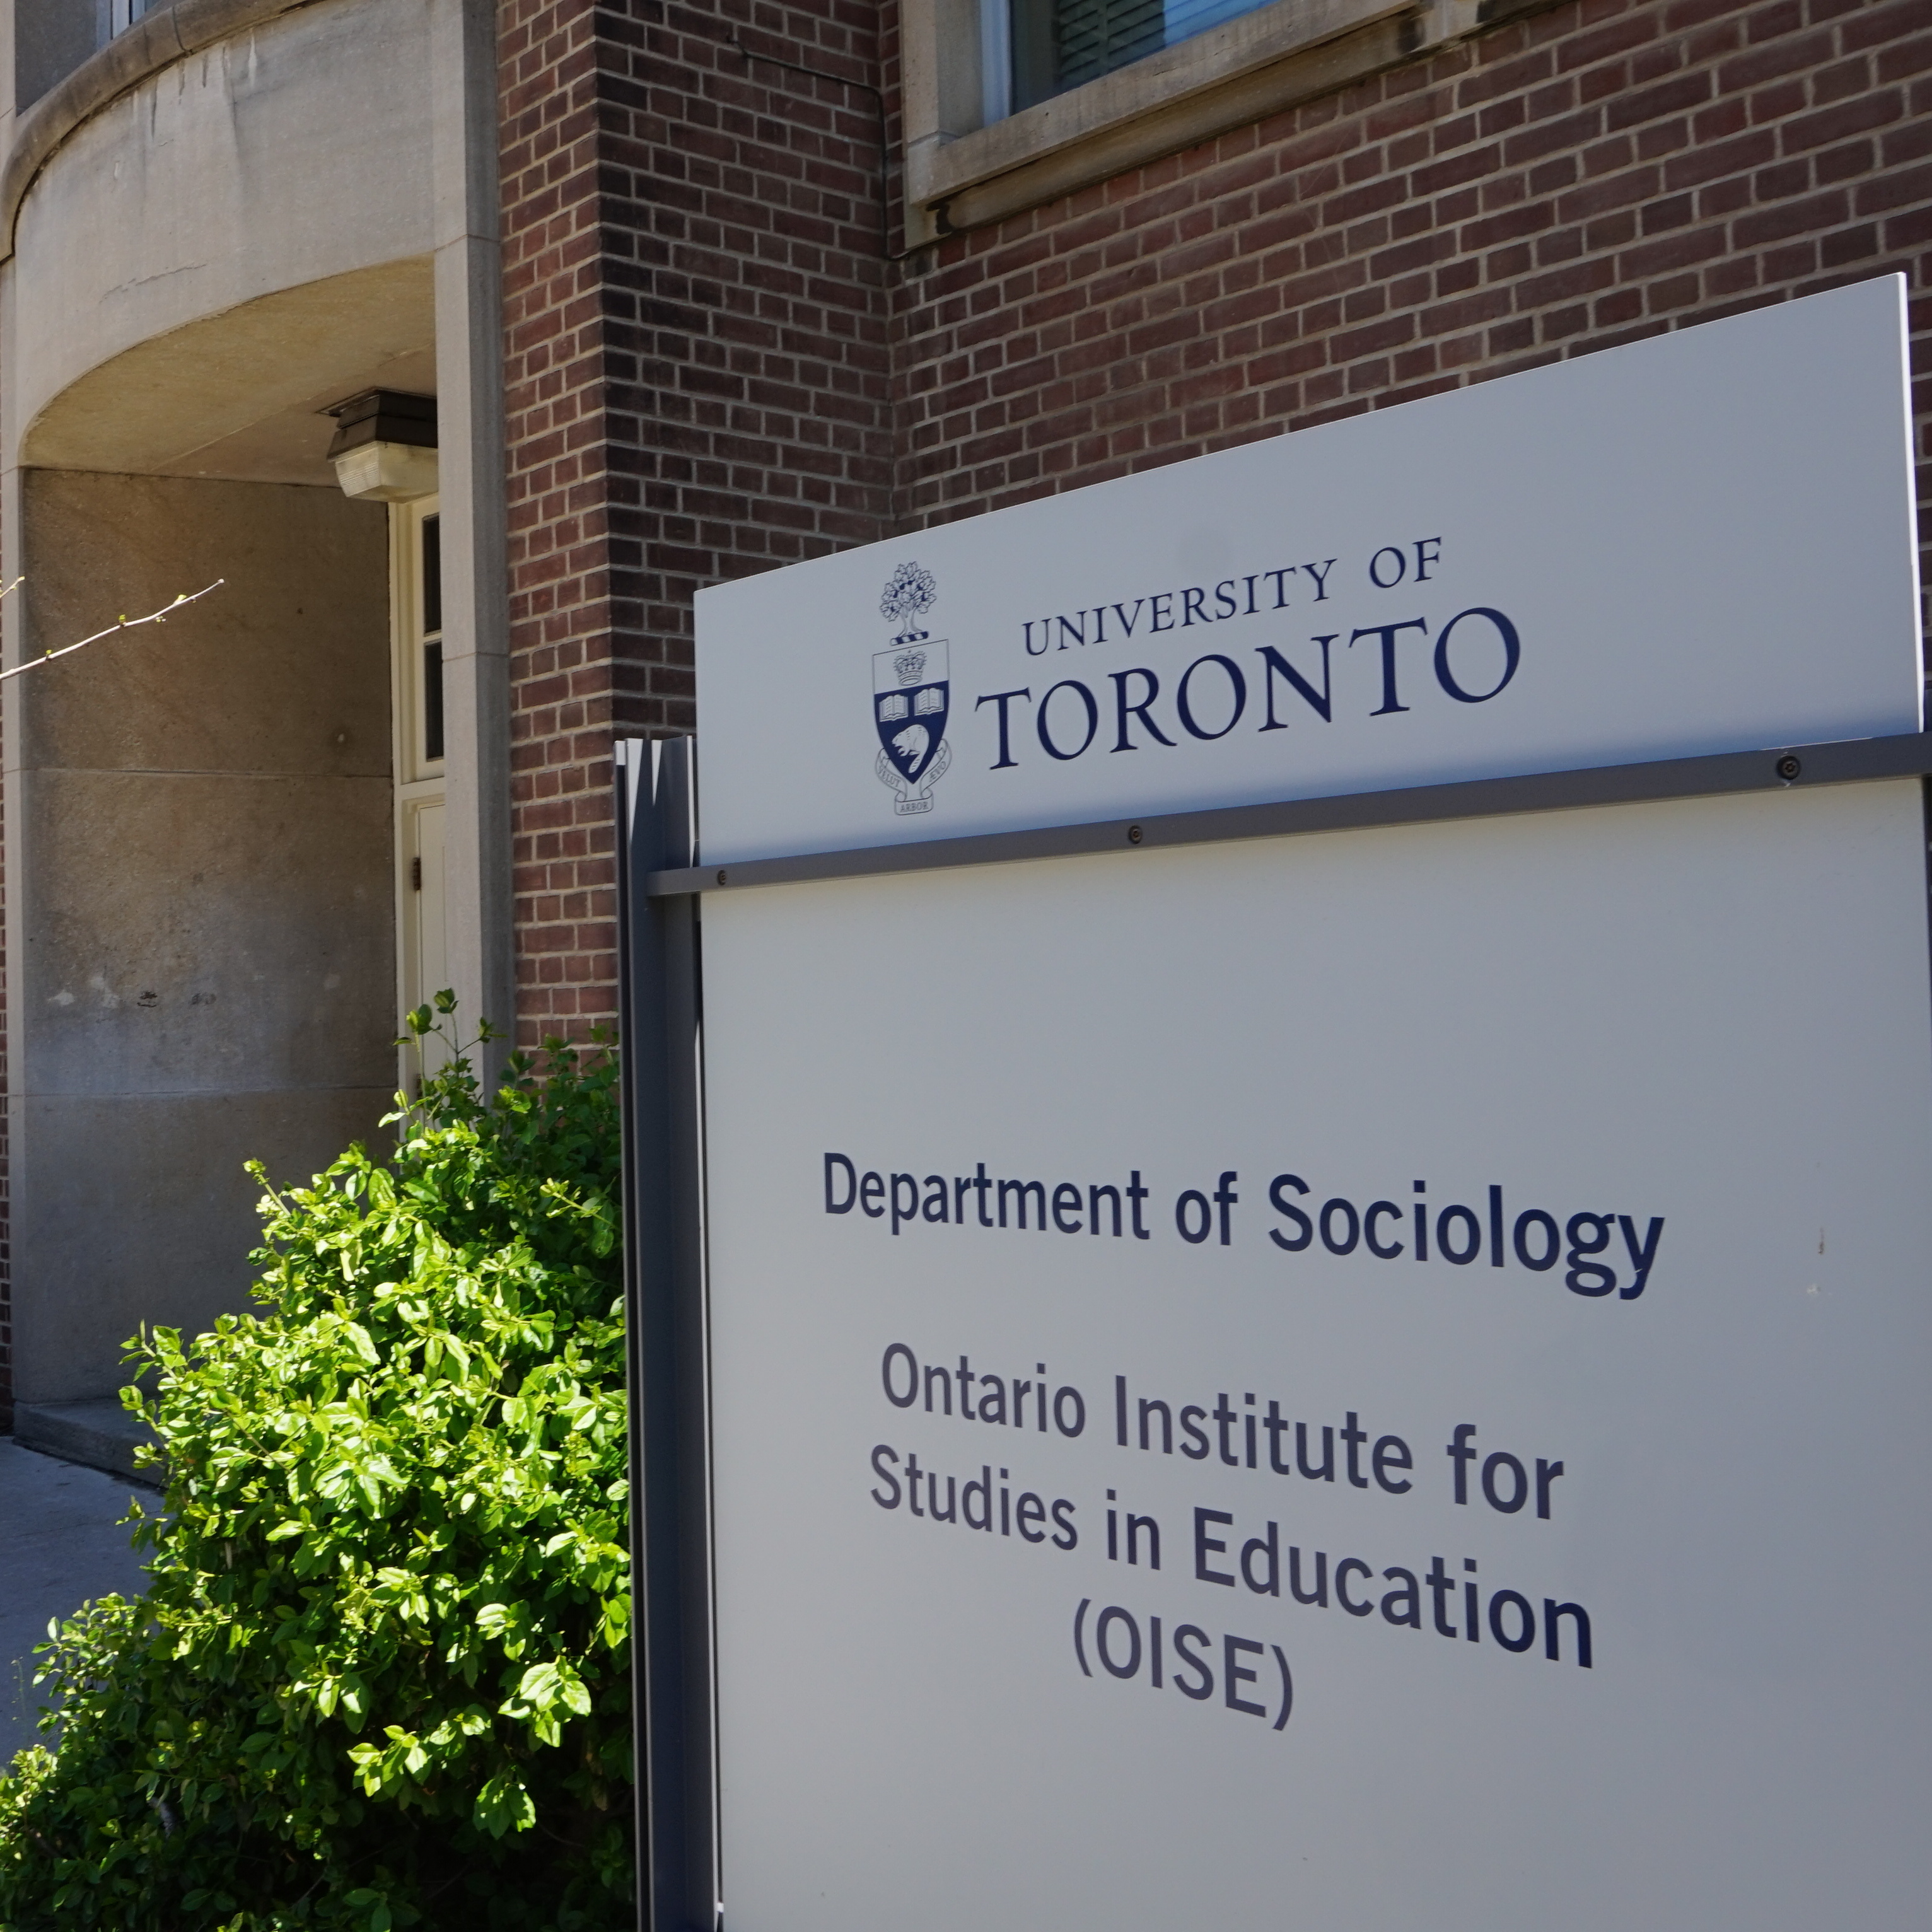 Building sign for the Department of Sociology and OISE at the University of Toronto